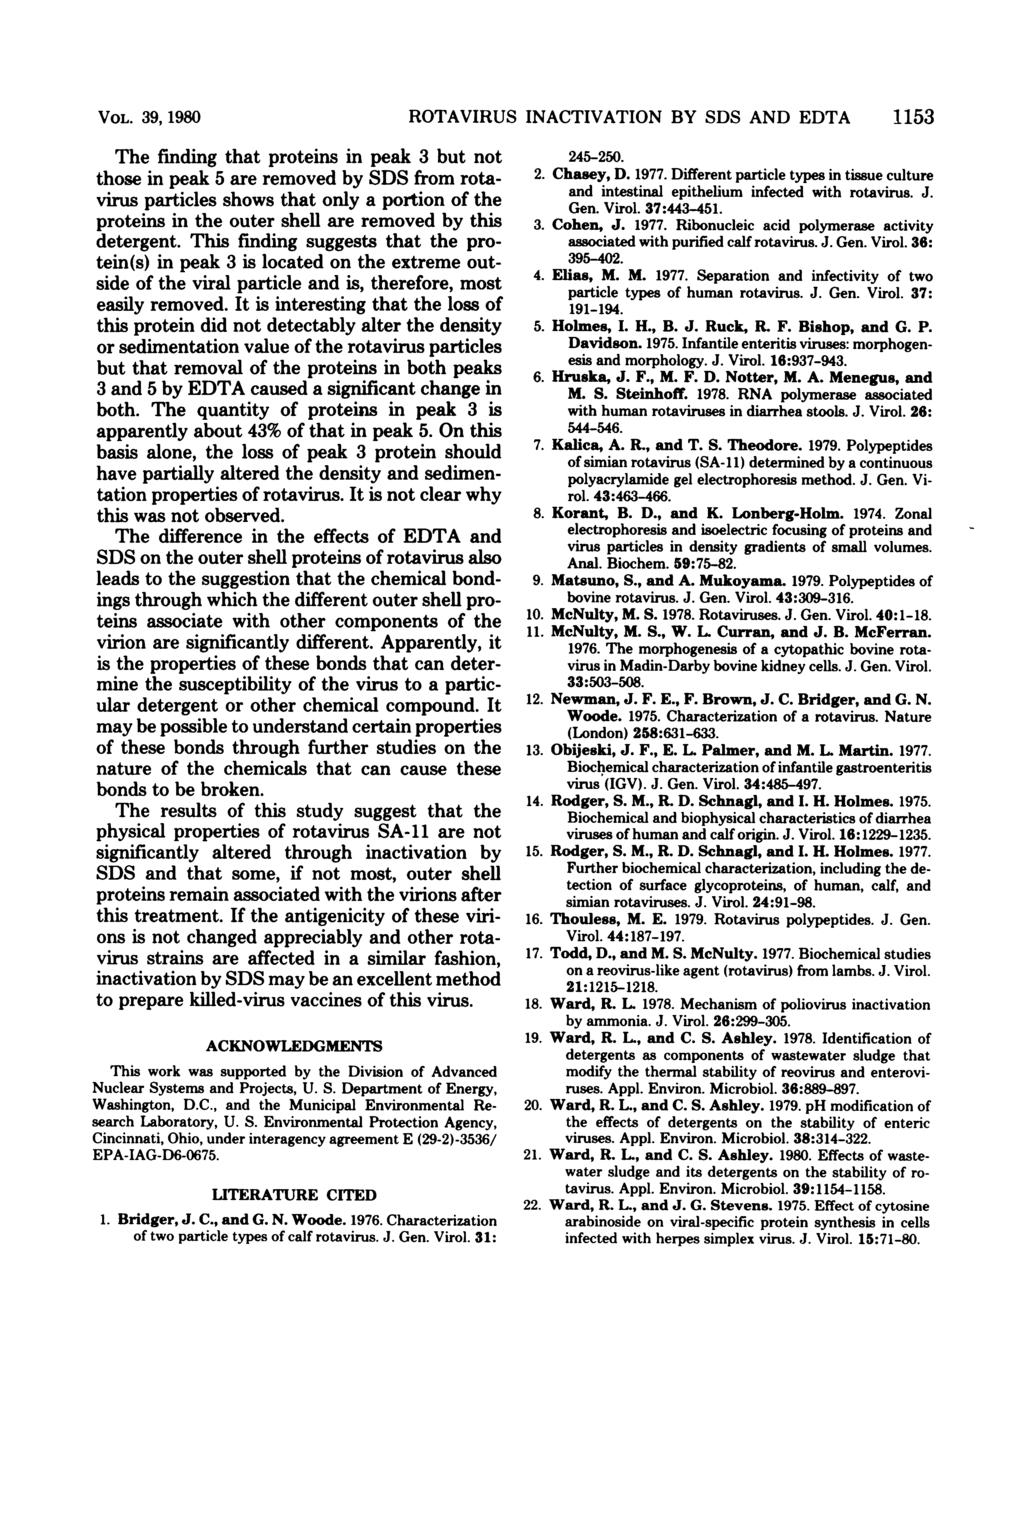 VOL. 39, 1980 The finding that proteins in peak 3 but not those in peak 5 are removed by SDS from rotavirus particles shows that only a portion of the proteins in the outer shell are removed by this